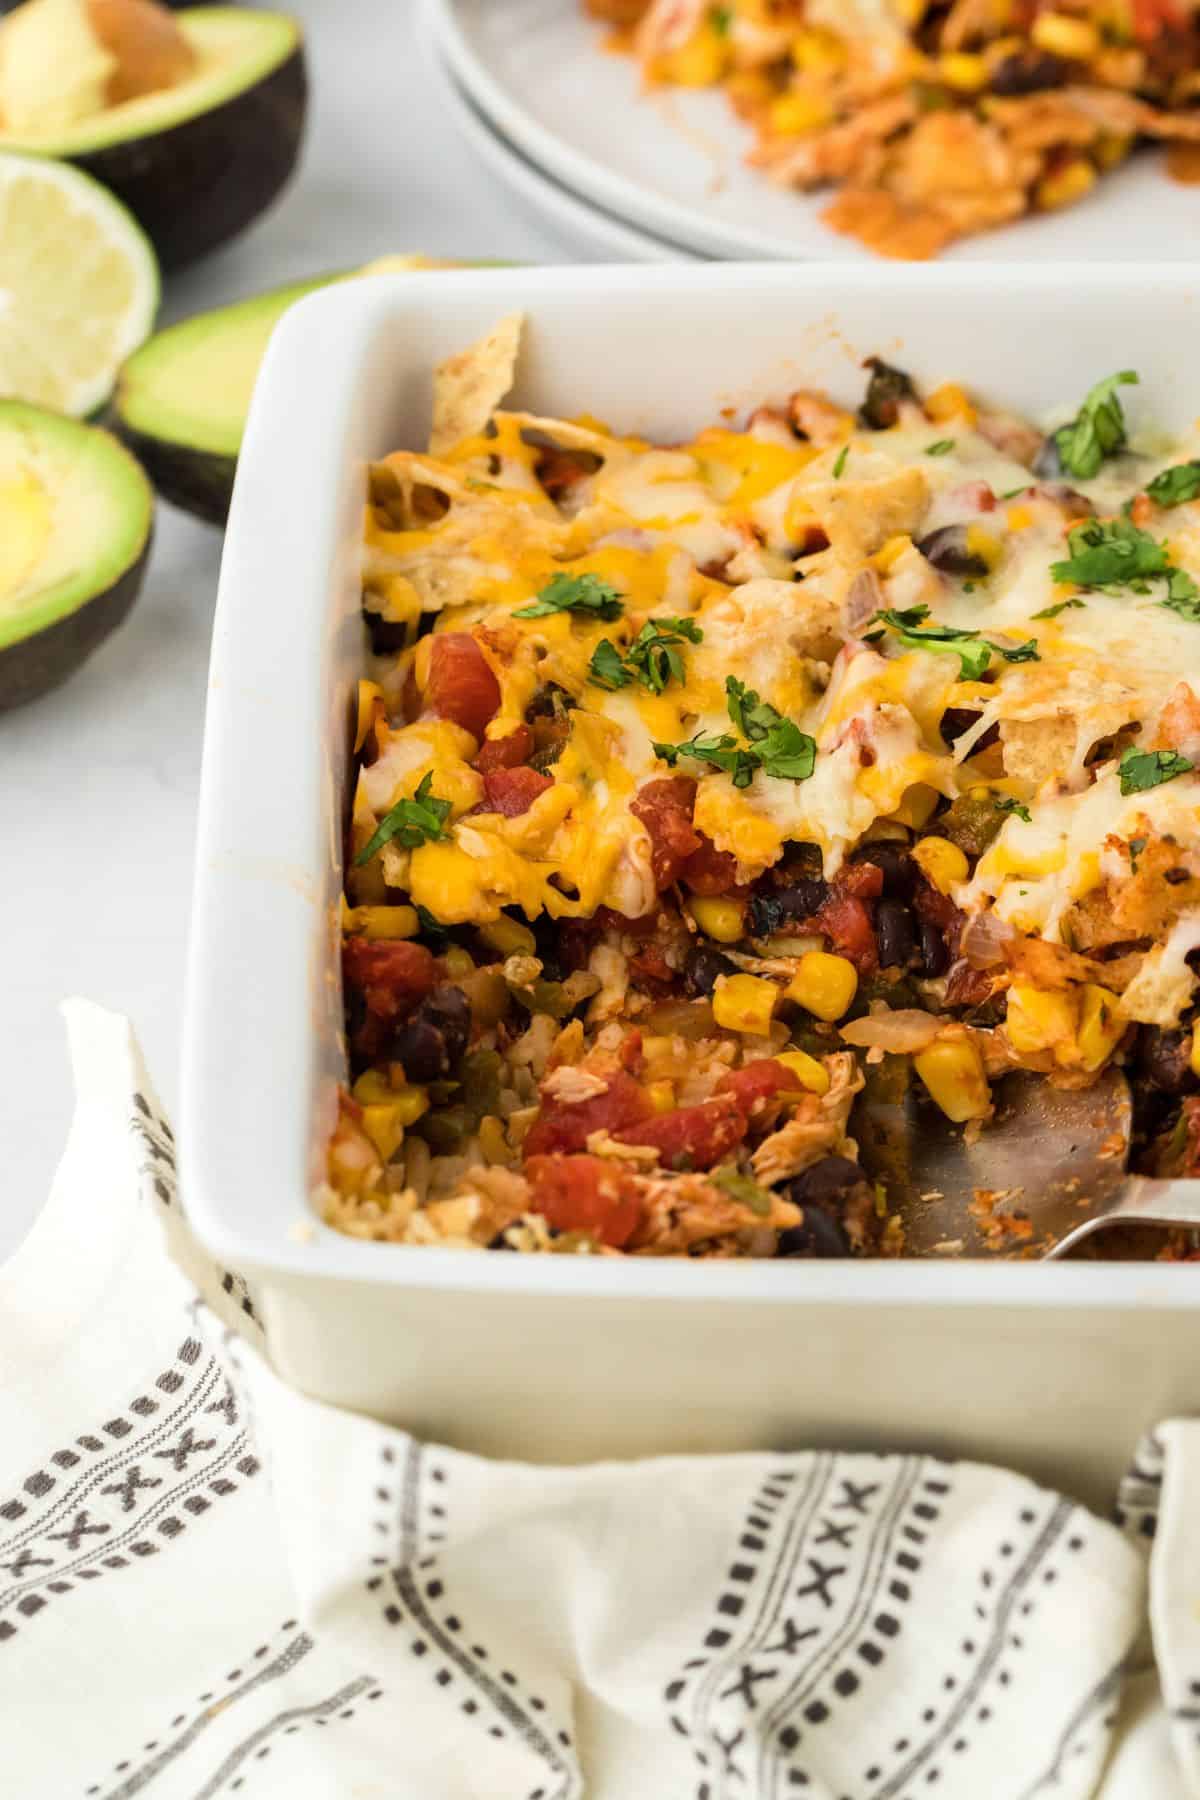 A white casserole dish filled with Southwestern chicken casserole, featuring layers of rice, beans, corn, shredded chicken, and melted cheese, garnished with chopped cilantro. Next to it are avocados and lime, with more of the casserole plated in the background